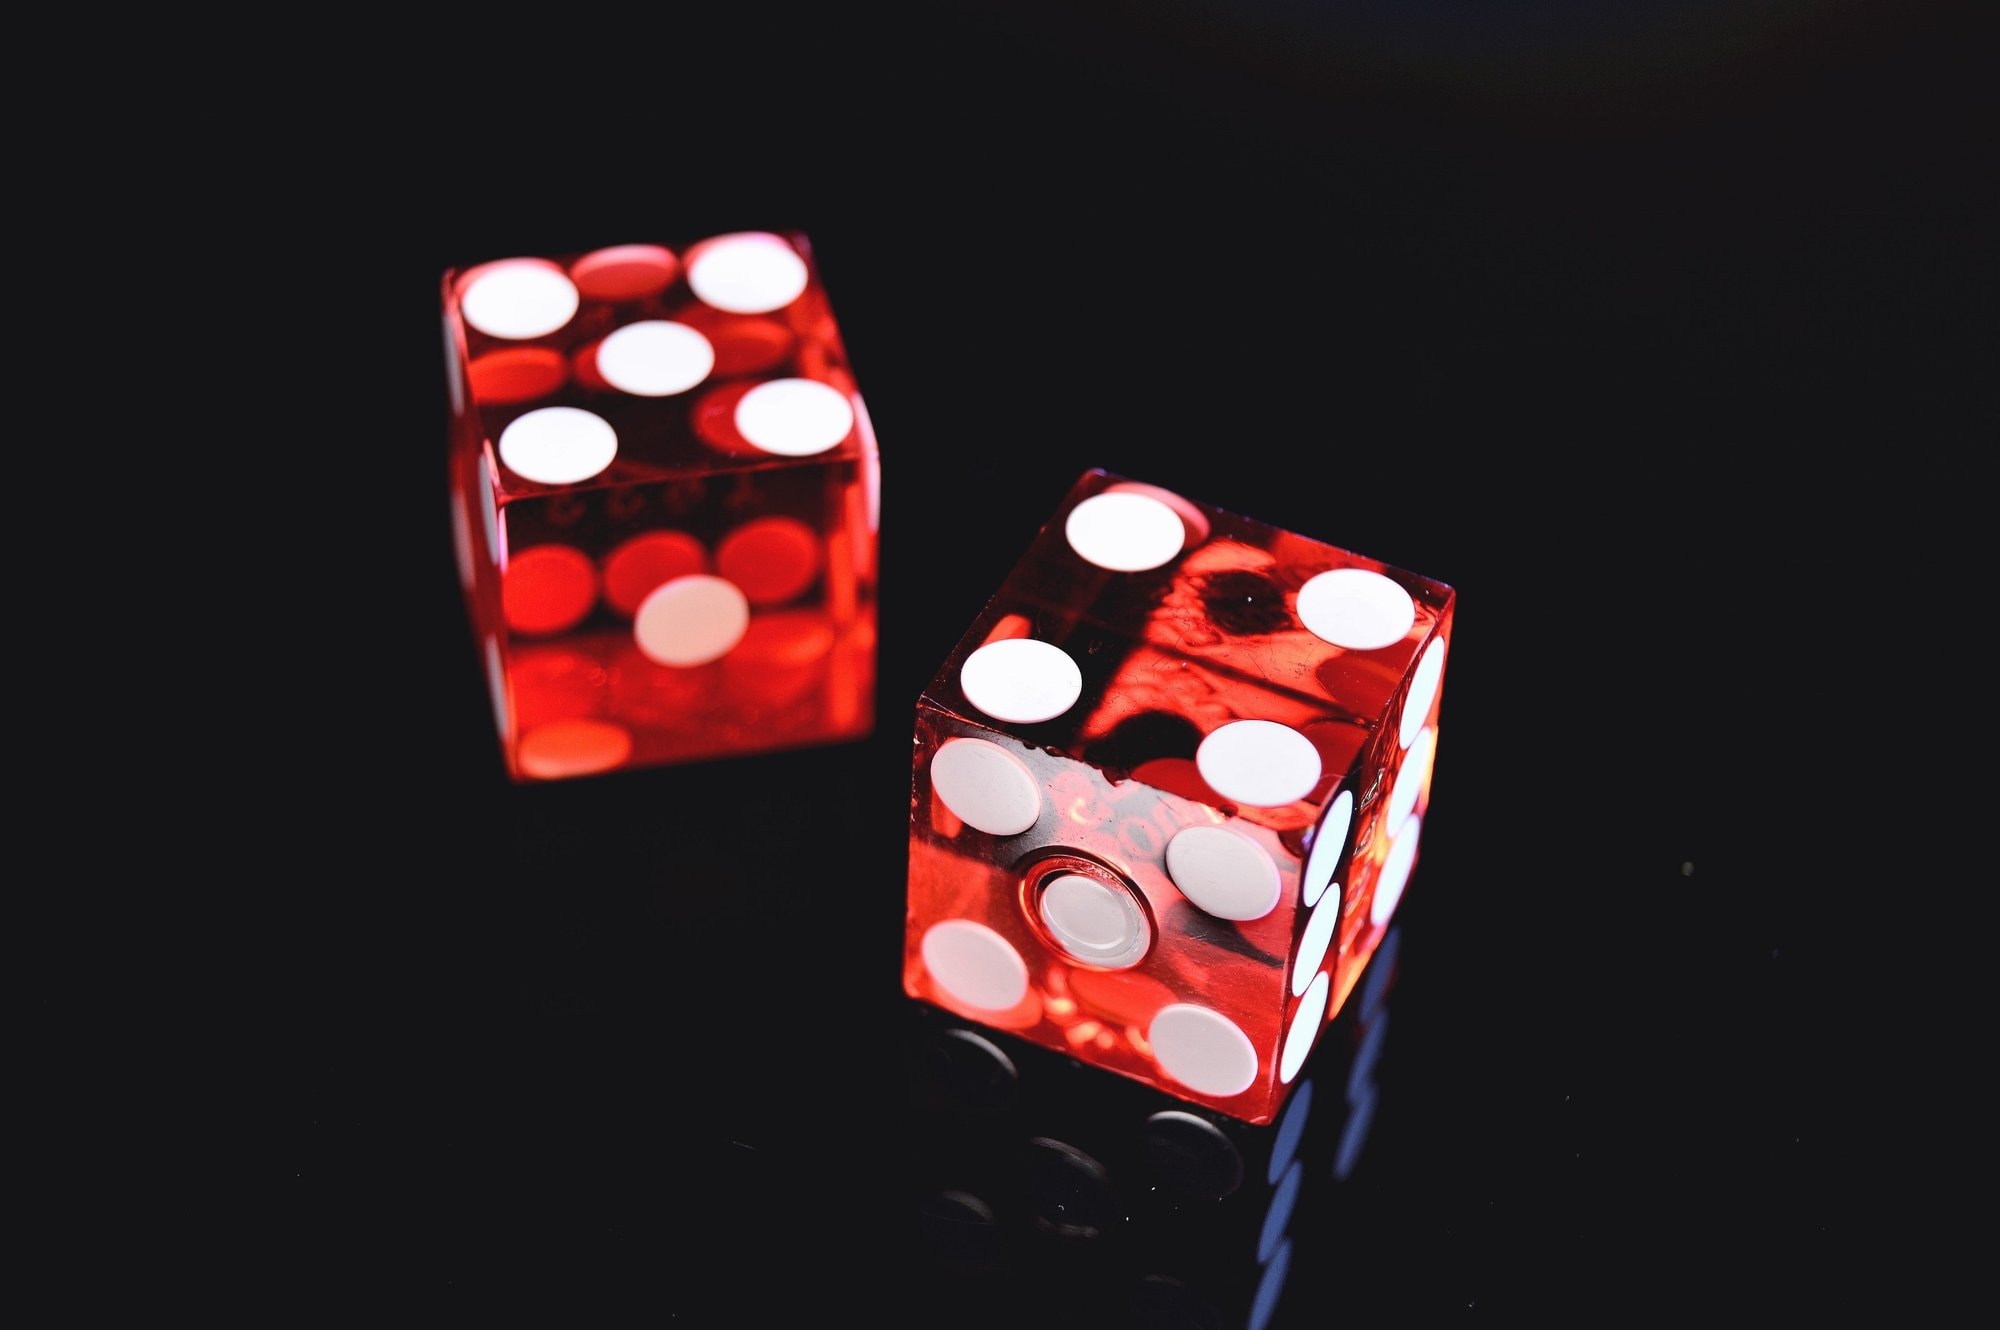 red dice on a black background